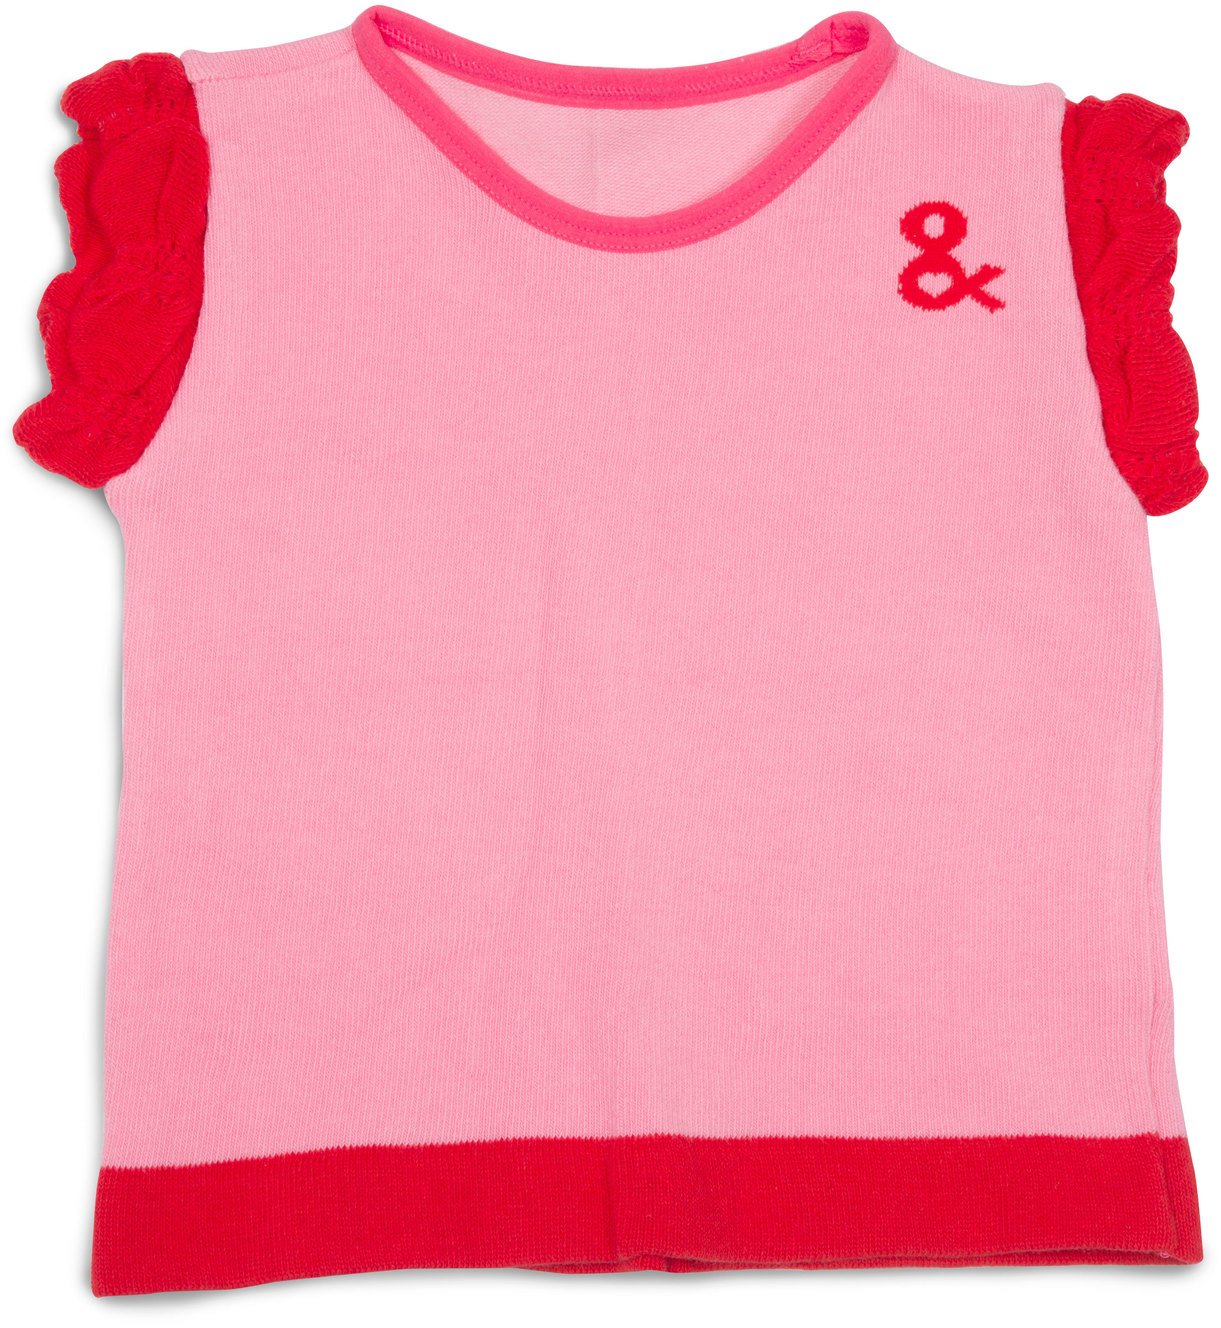 Pink and Coral Ruffled Baby T-Shirt Baby Shirt Izzy & Owie - GigglesGear.com